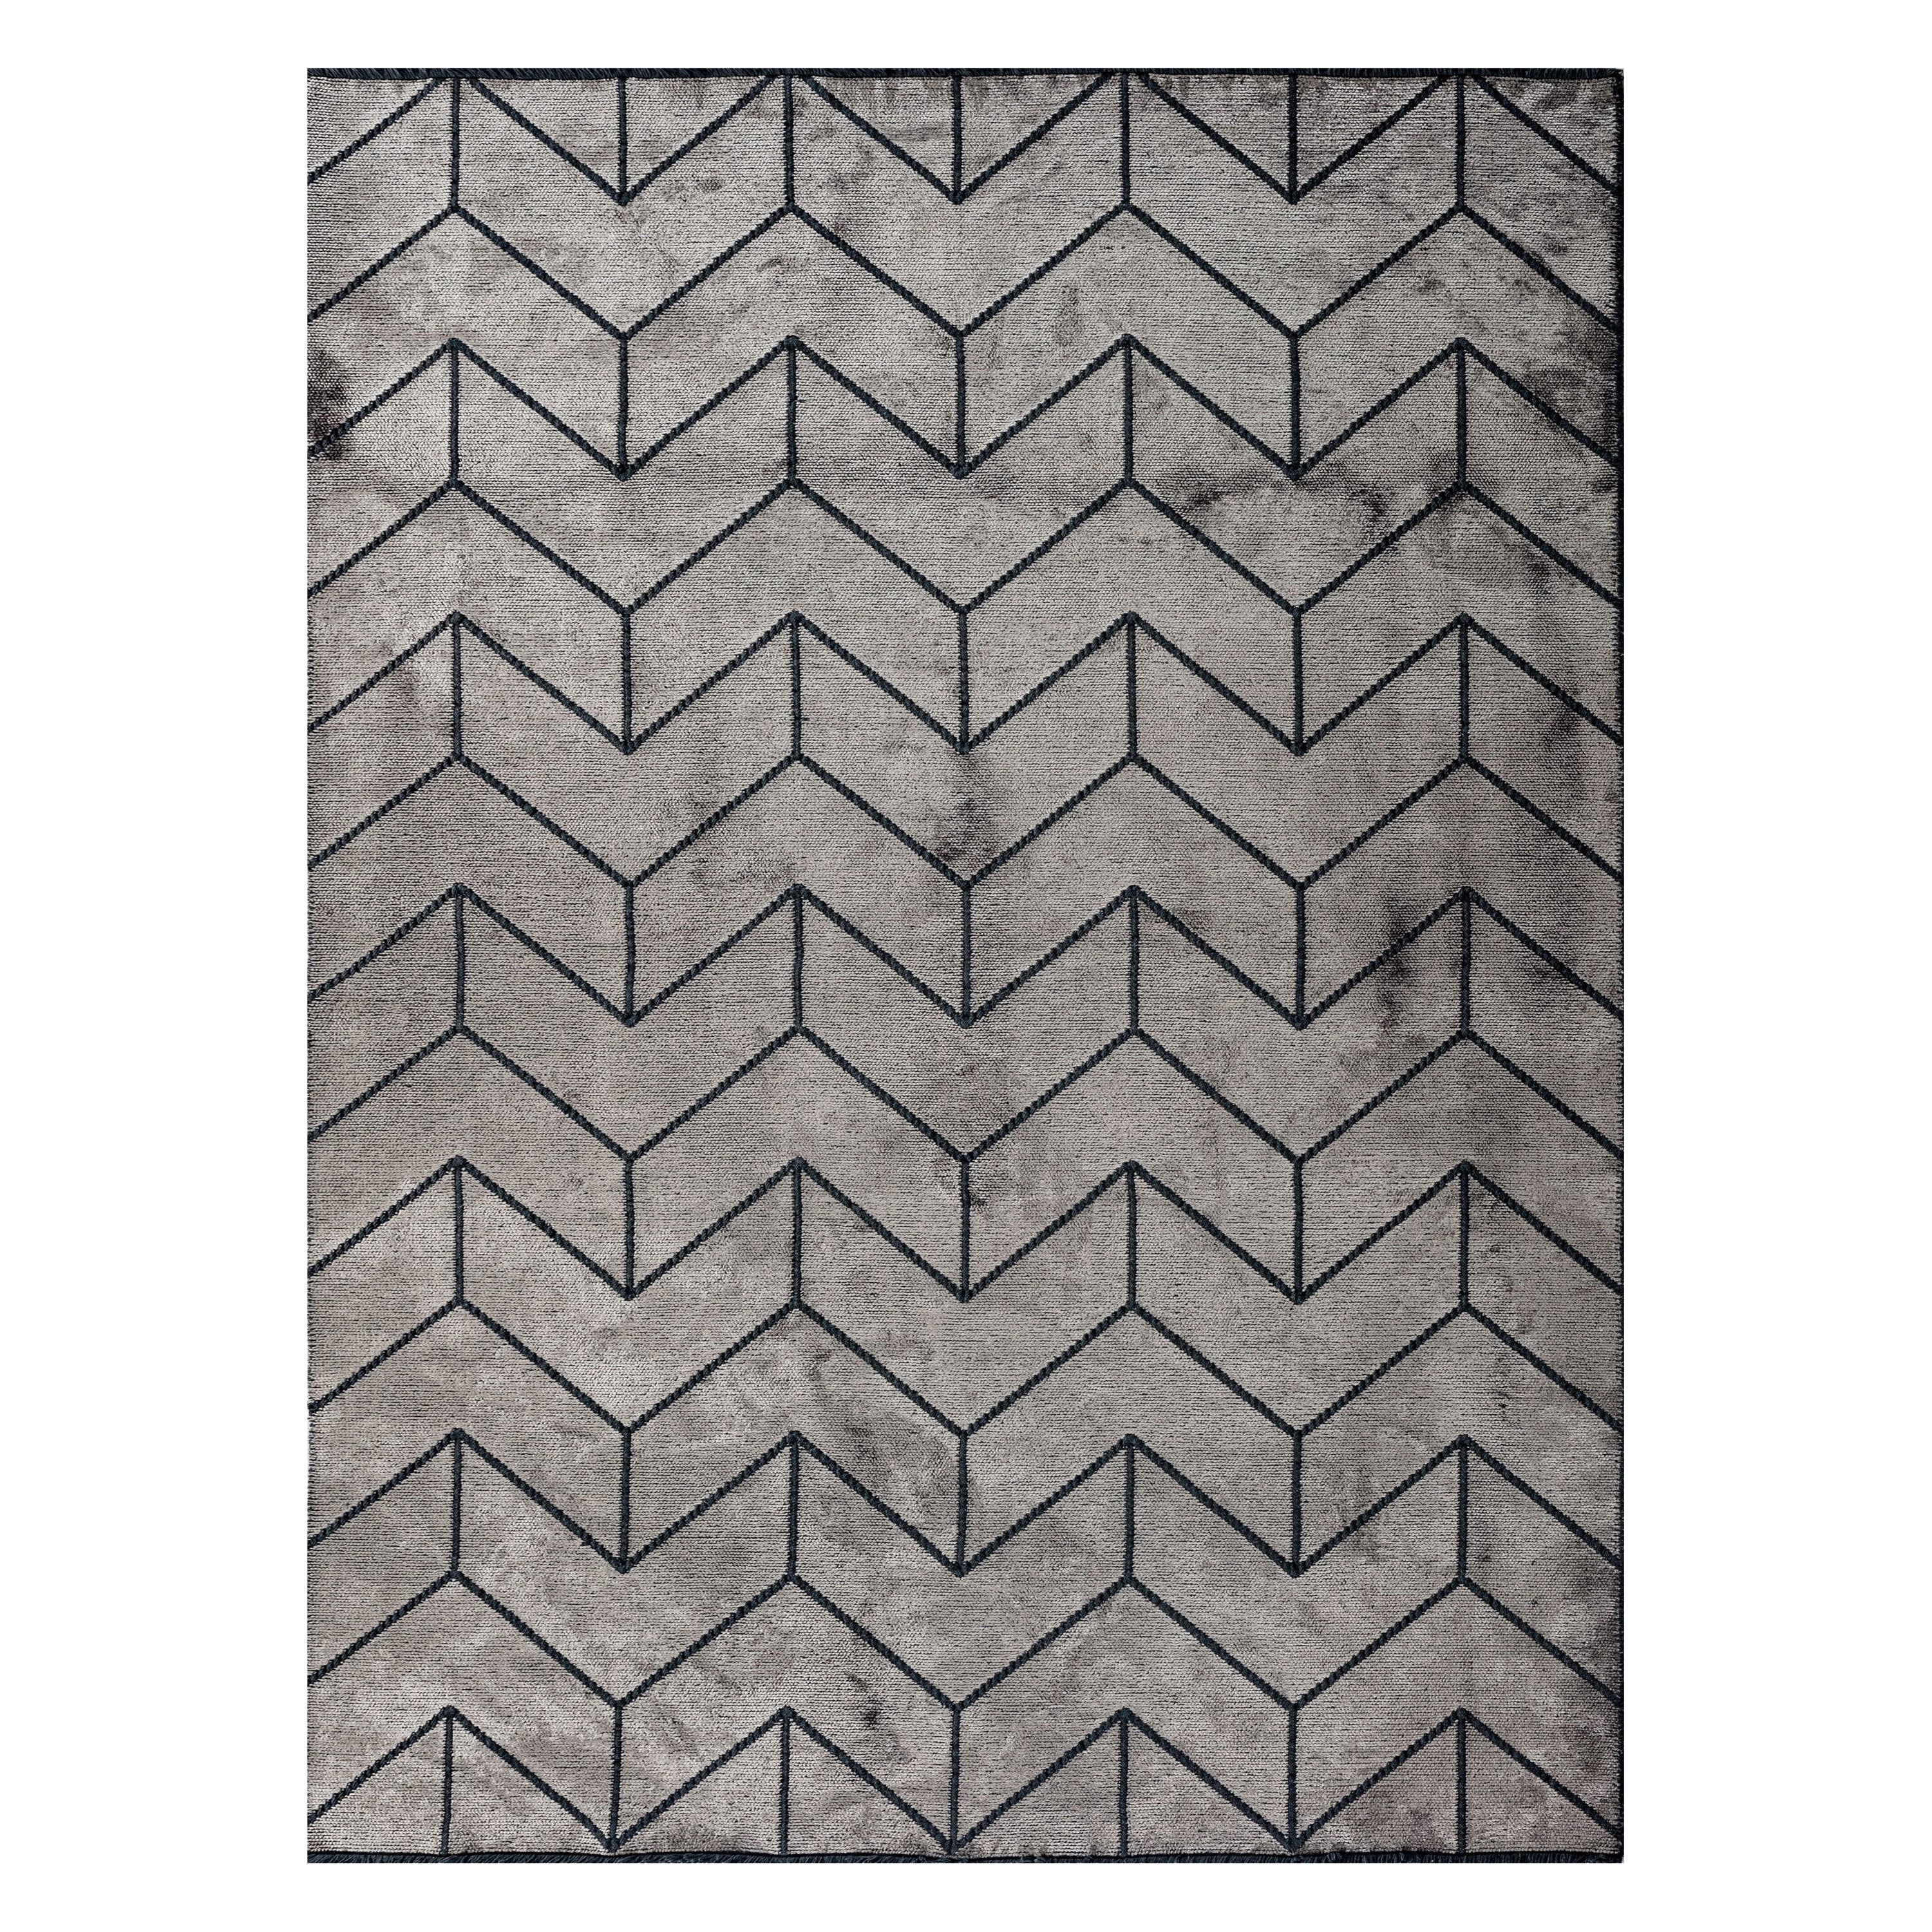 For Sale:  (Gray) Modern  Chevron Luxury Hand-Finished Area Rug